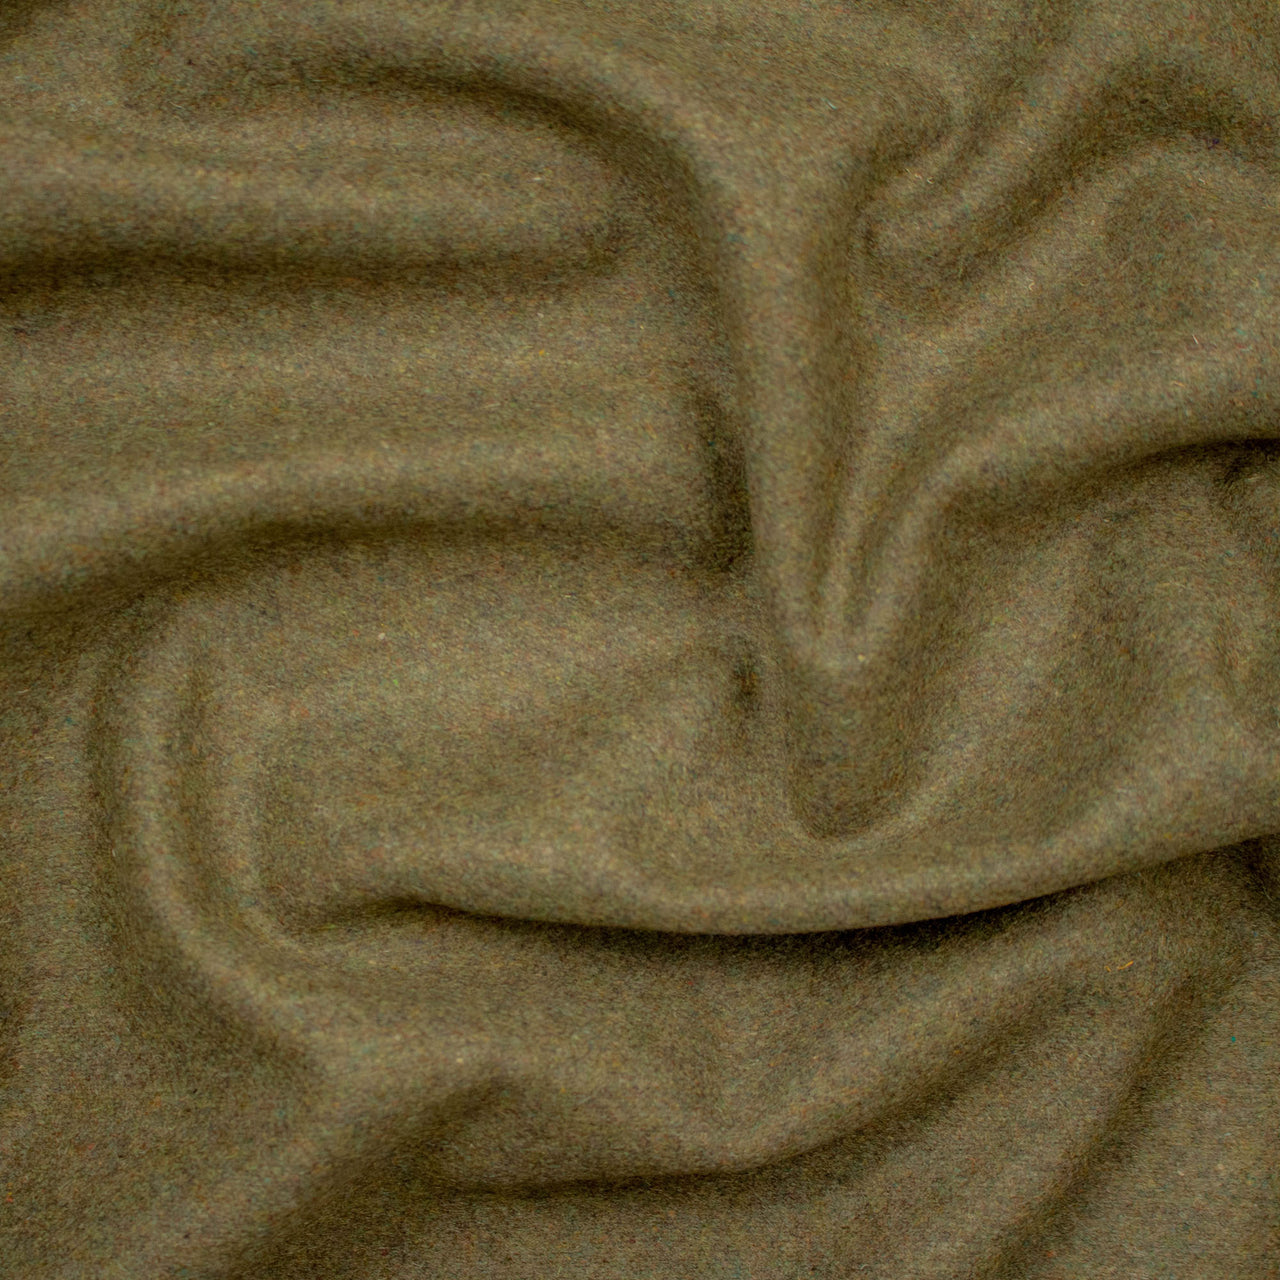 Olive - Melton Wool Fabric -  Soft and Warm Fabric for Coats, Clothing and Blankets